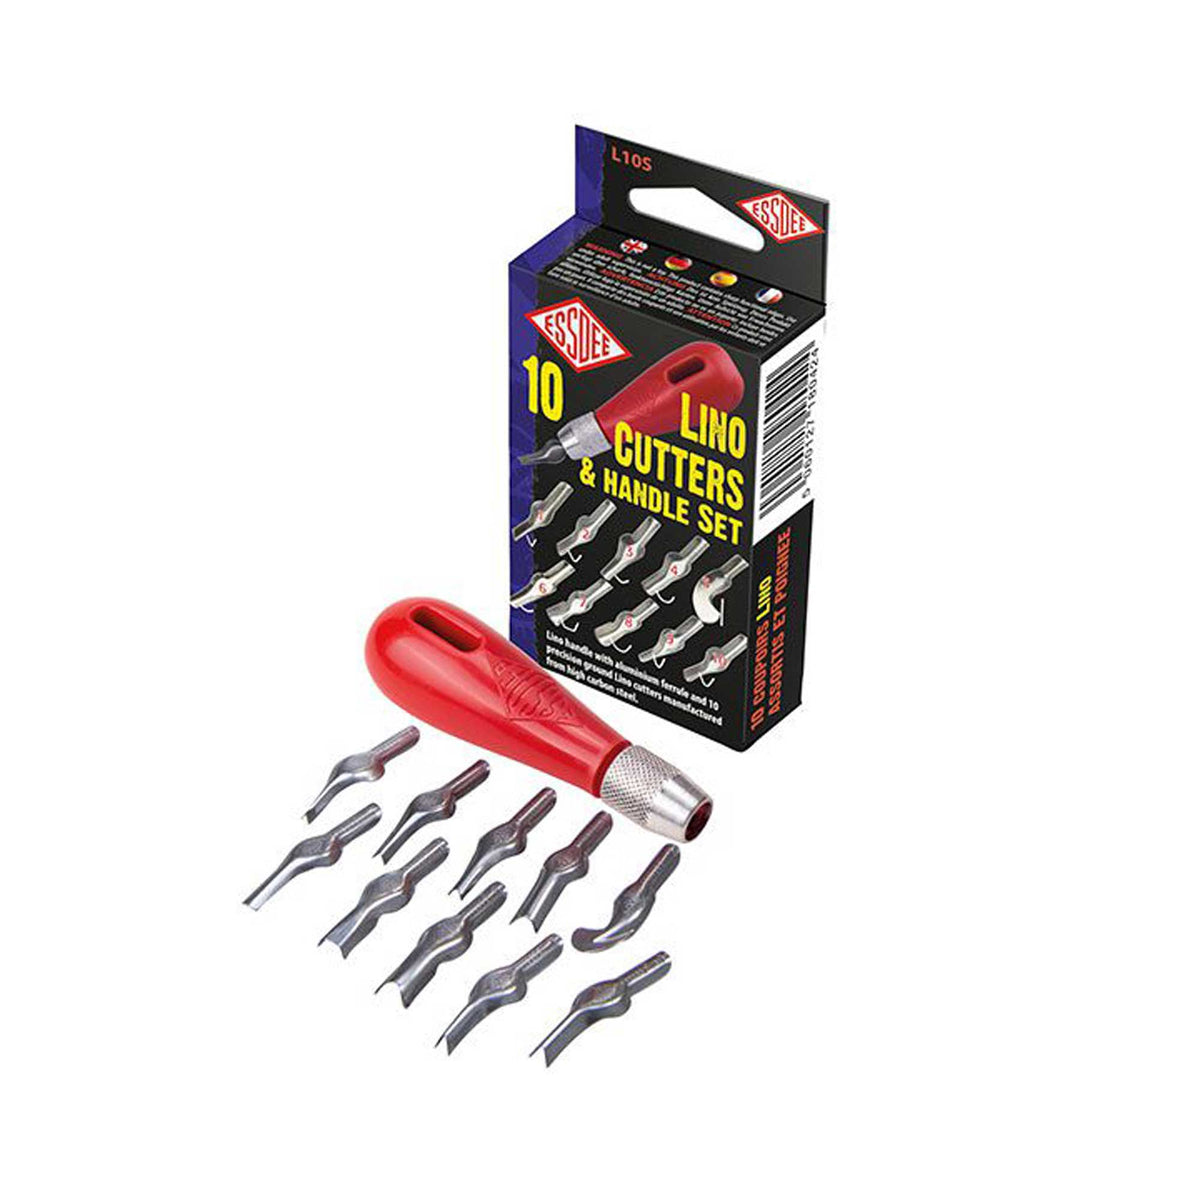 Essdee Lino Cutters and Handle Set (10 Cutters)